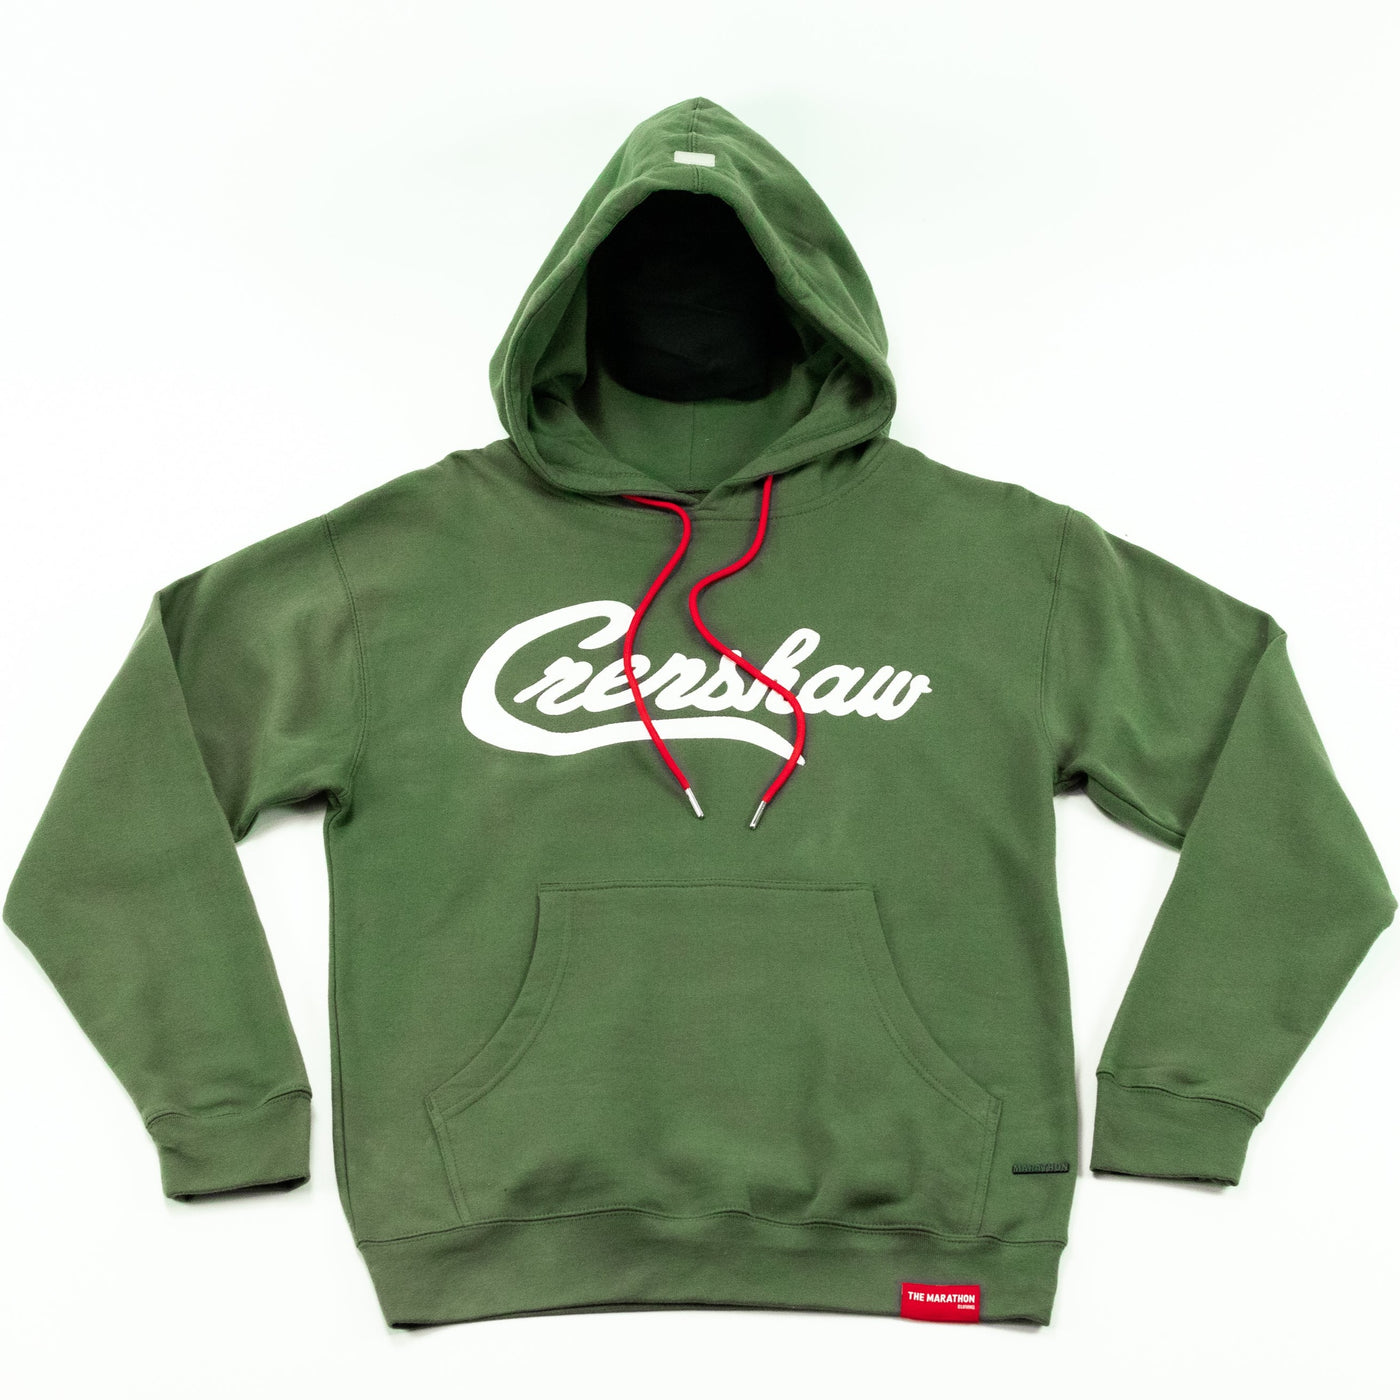 Limited Edition Crenshaw Hoodie - Olive/White